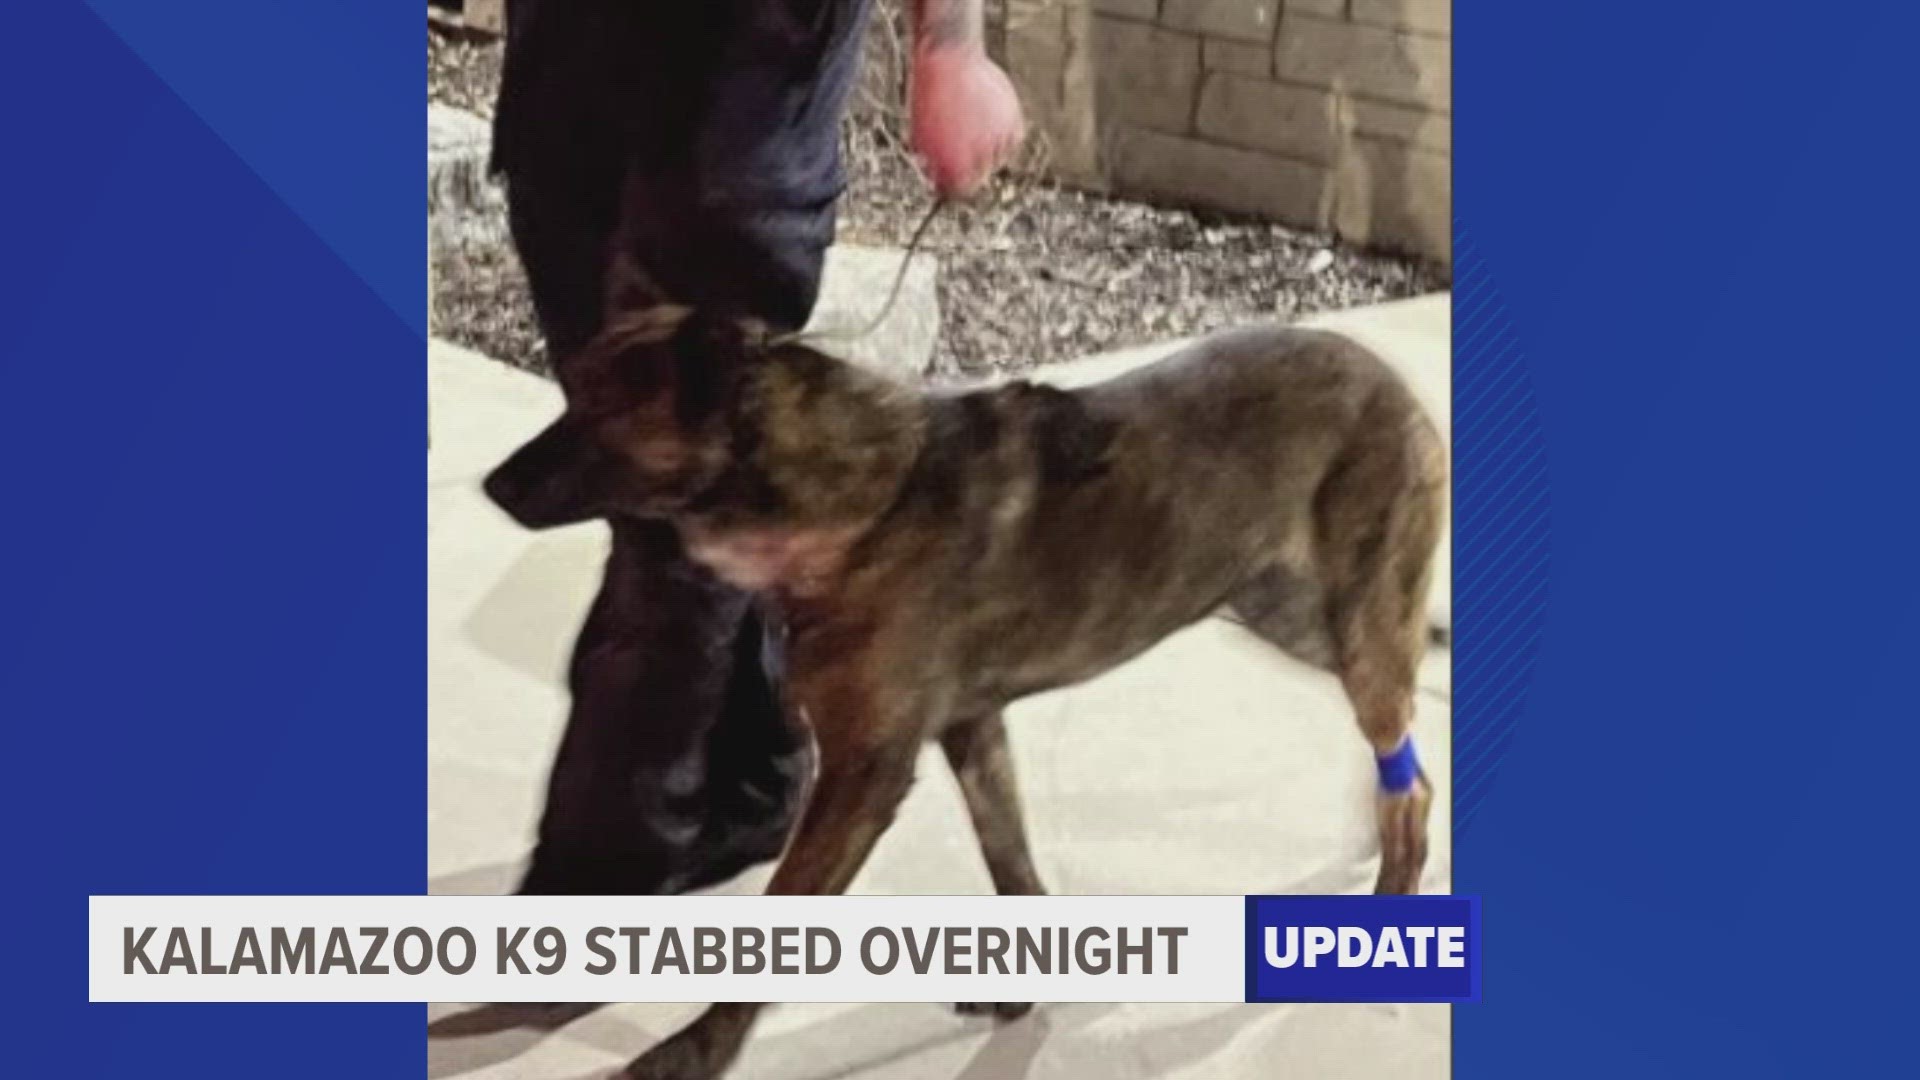 A K9 is recovering after being stabbed several times by a suspect resisting officers in Kalamazoo, the Department of Public Safety says.